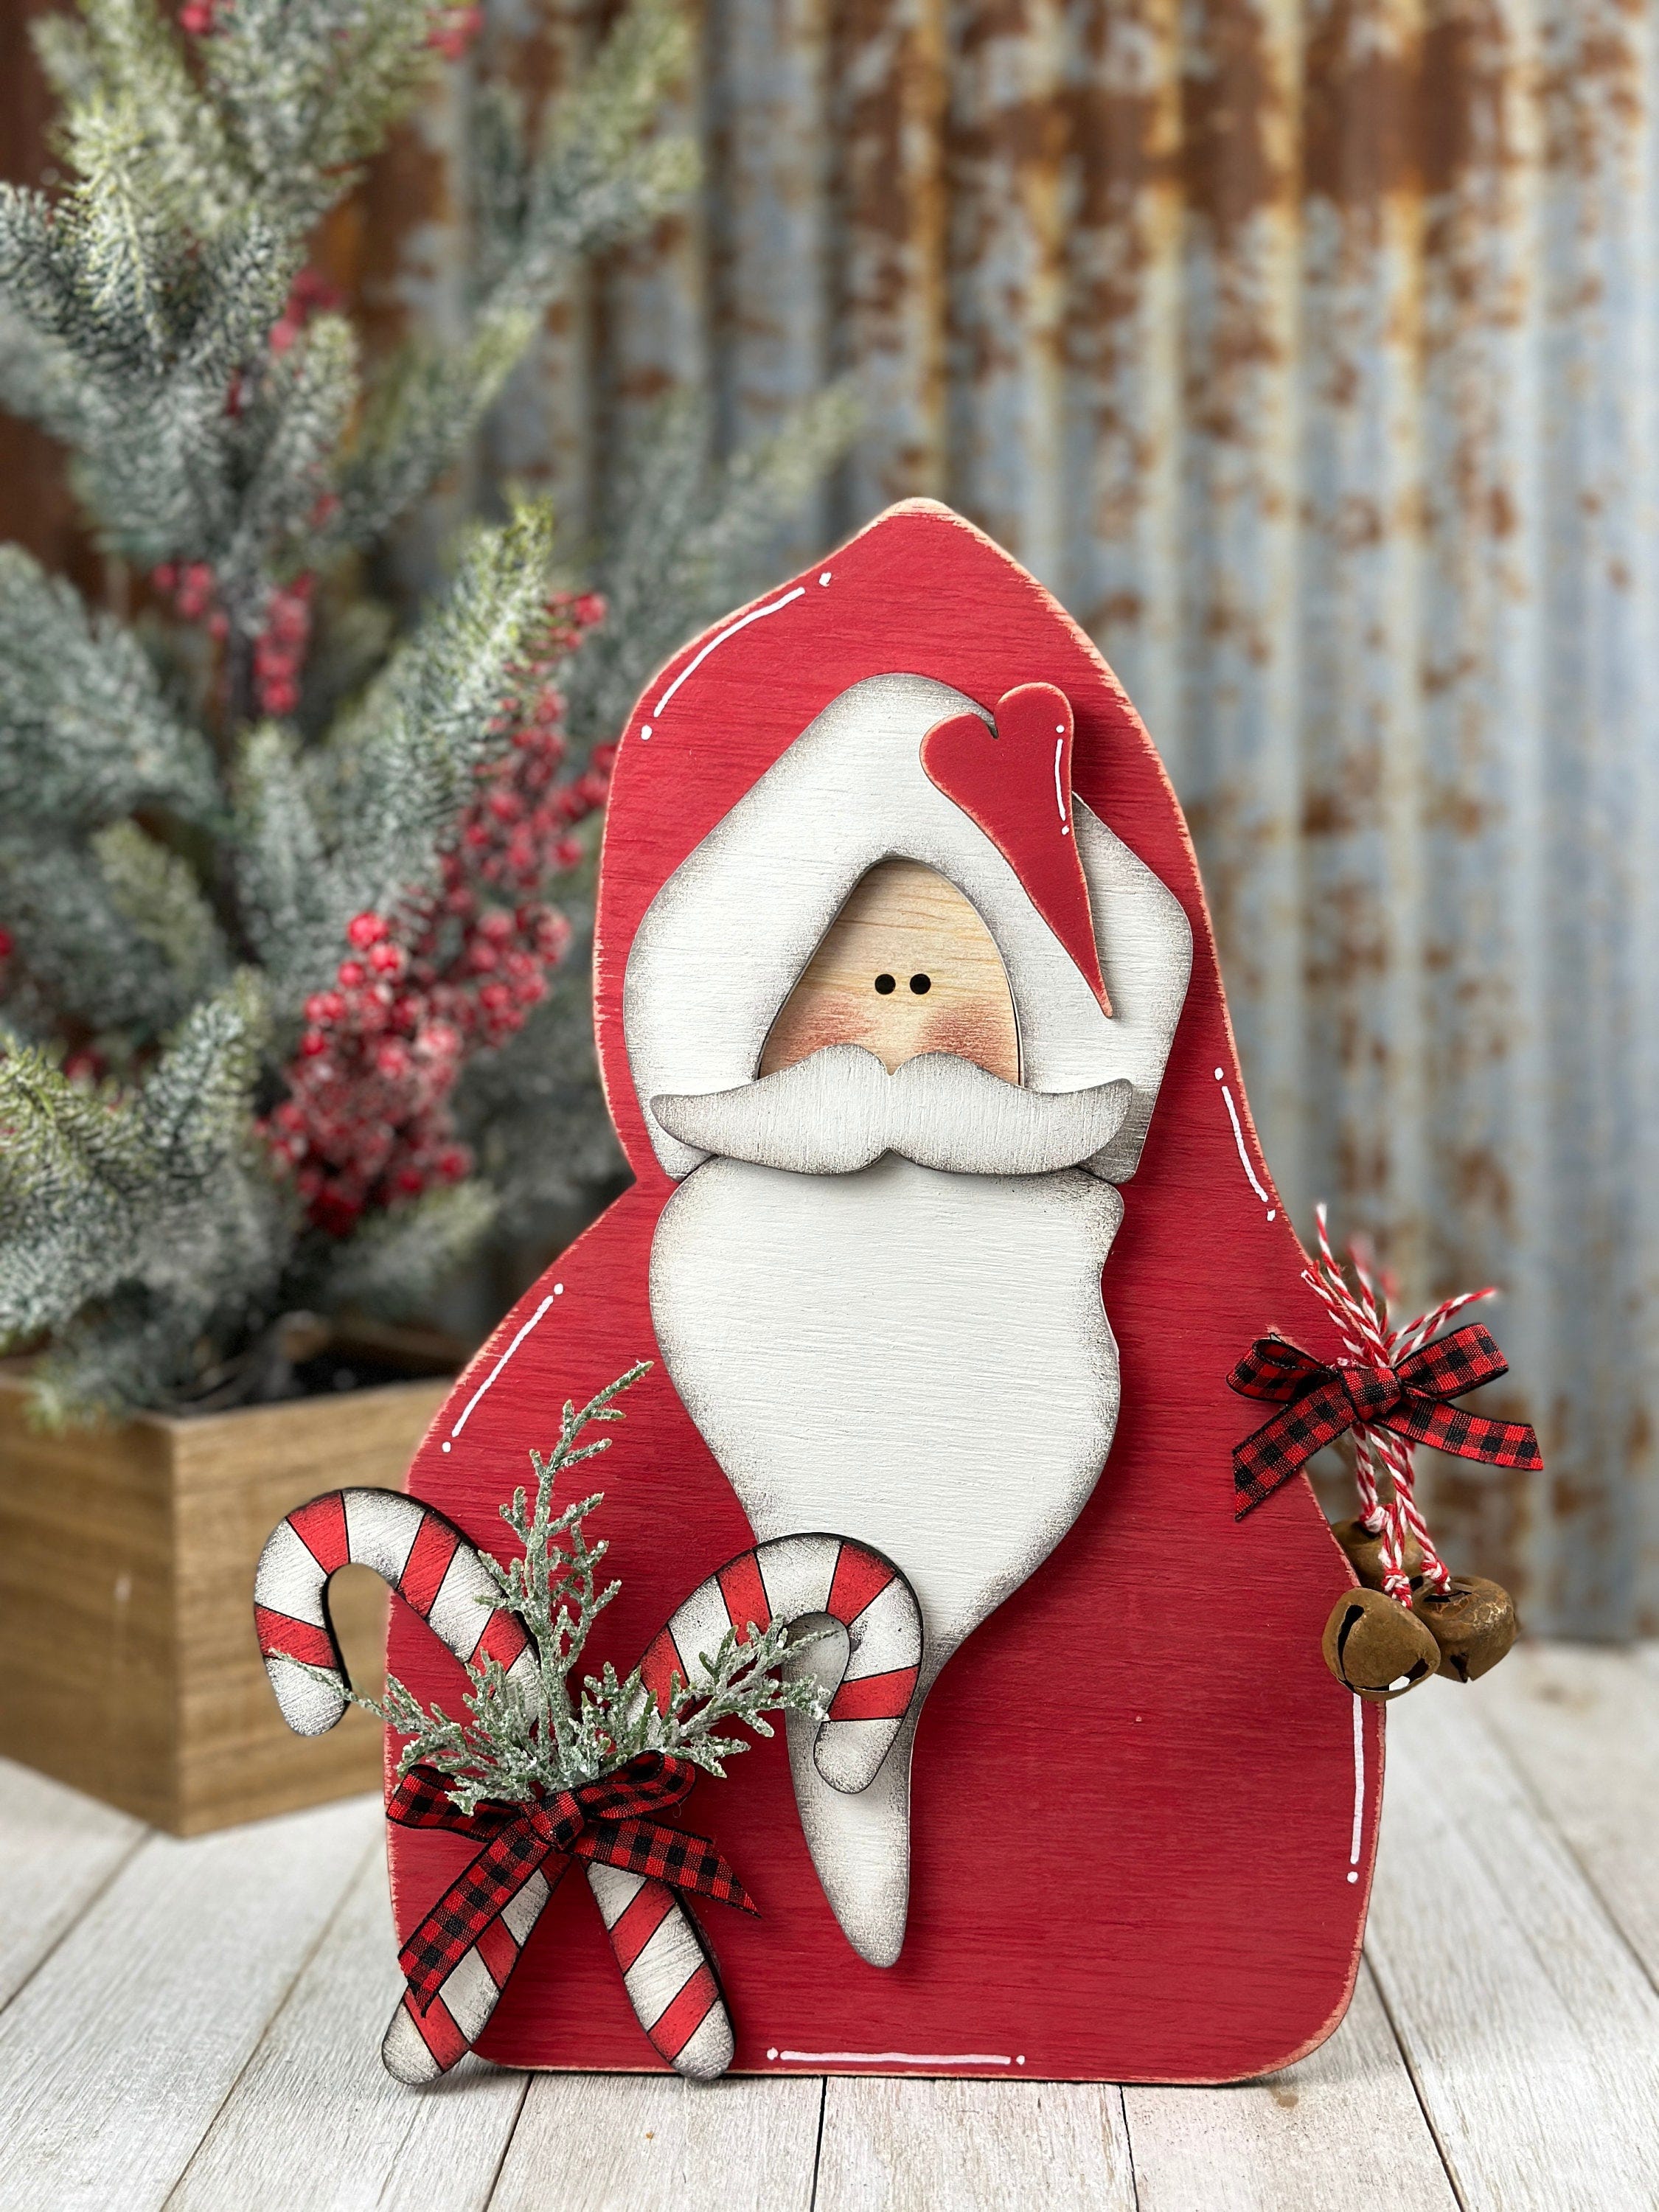 Santa Claus Christmas Shelf Sitter Digital Download for Glowforge or Laser Not a Physical Item